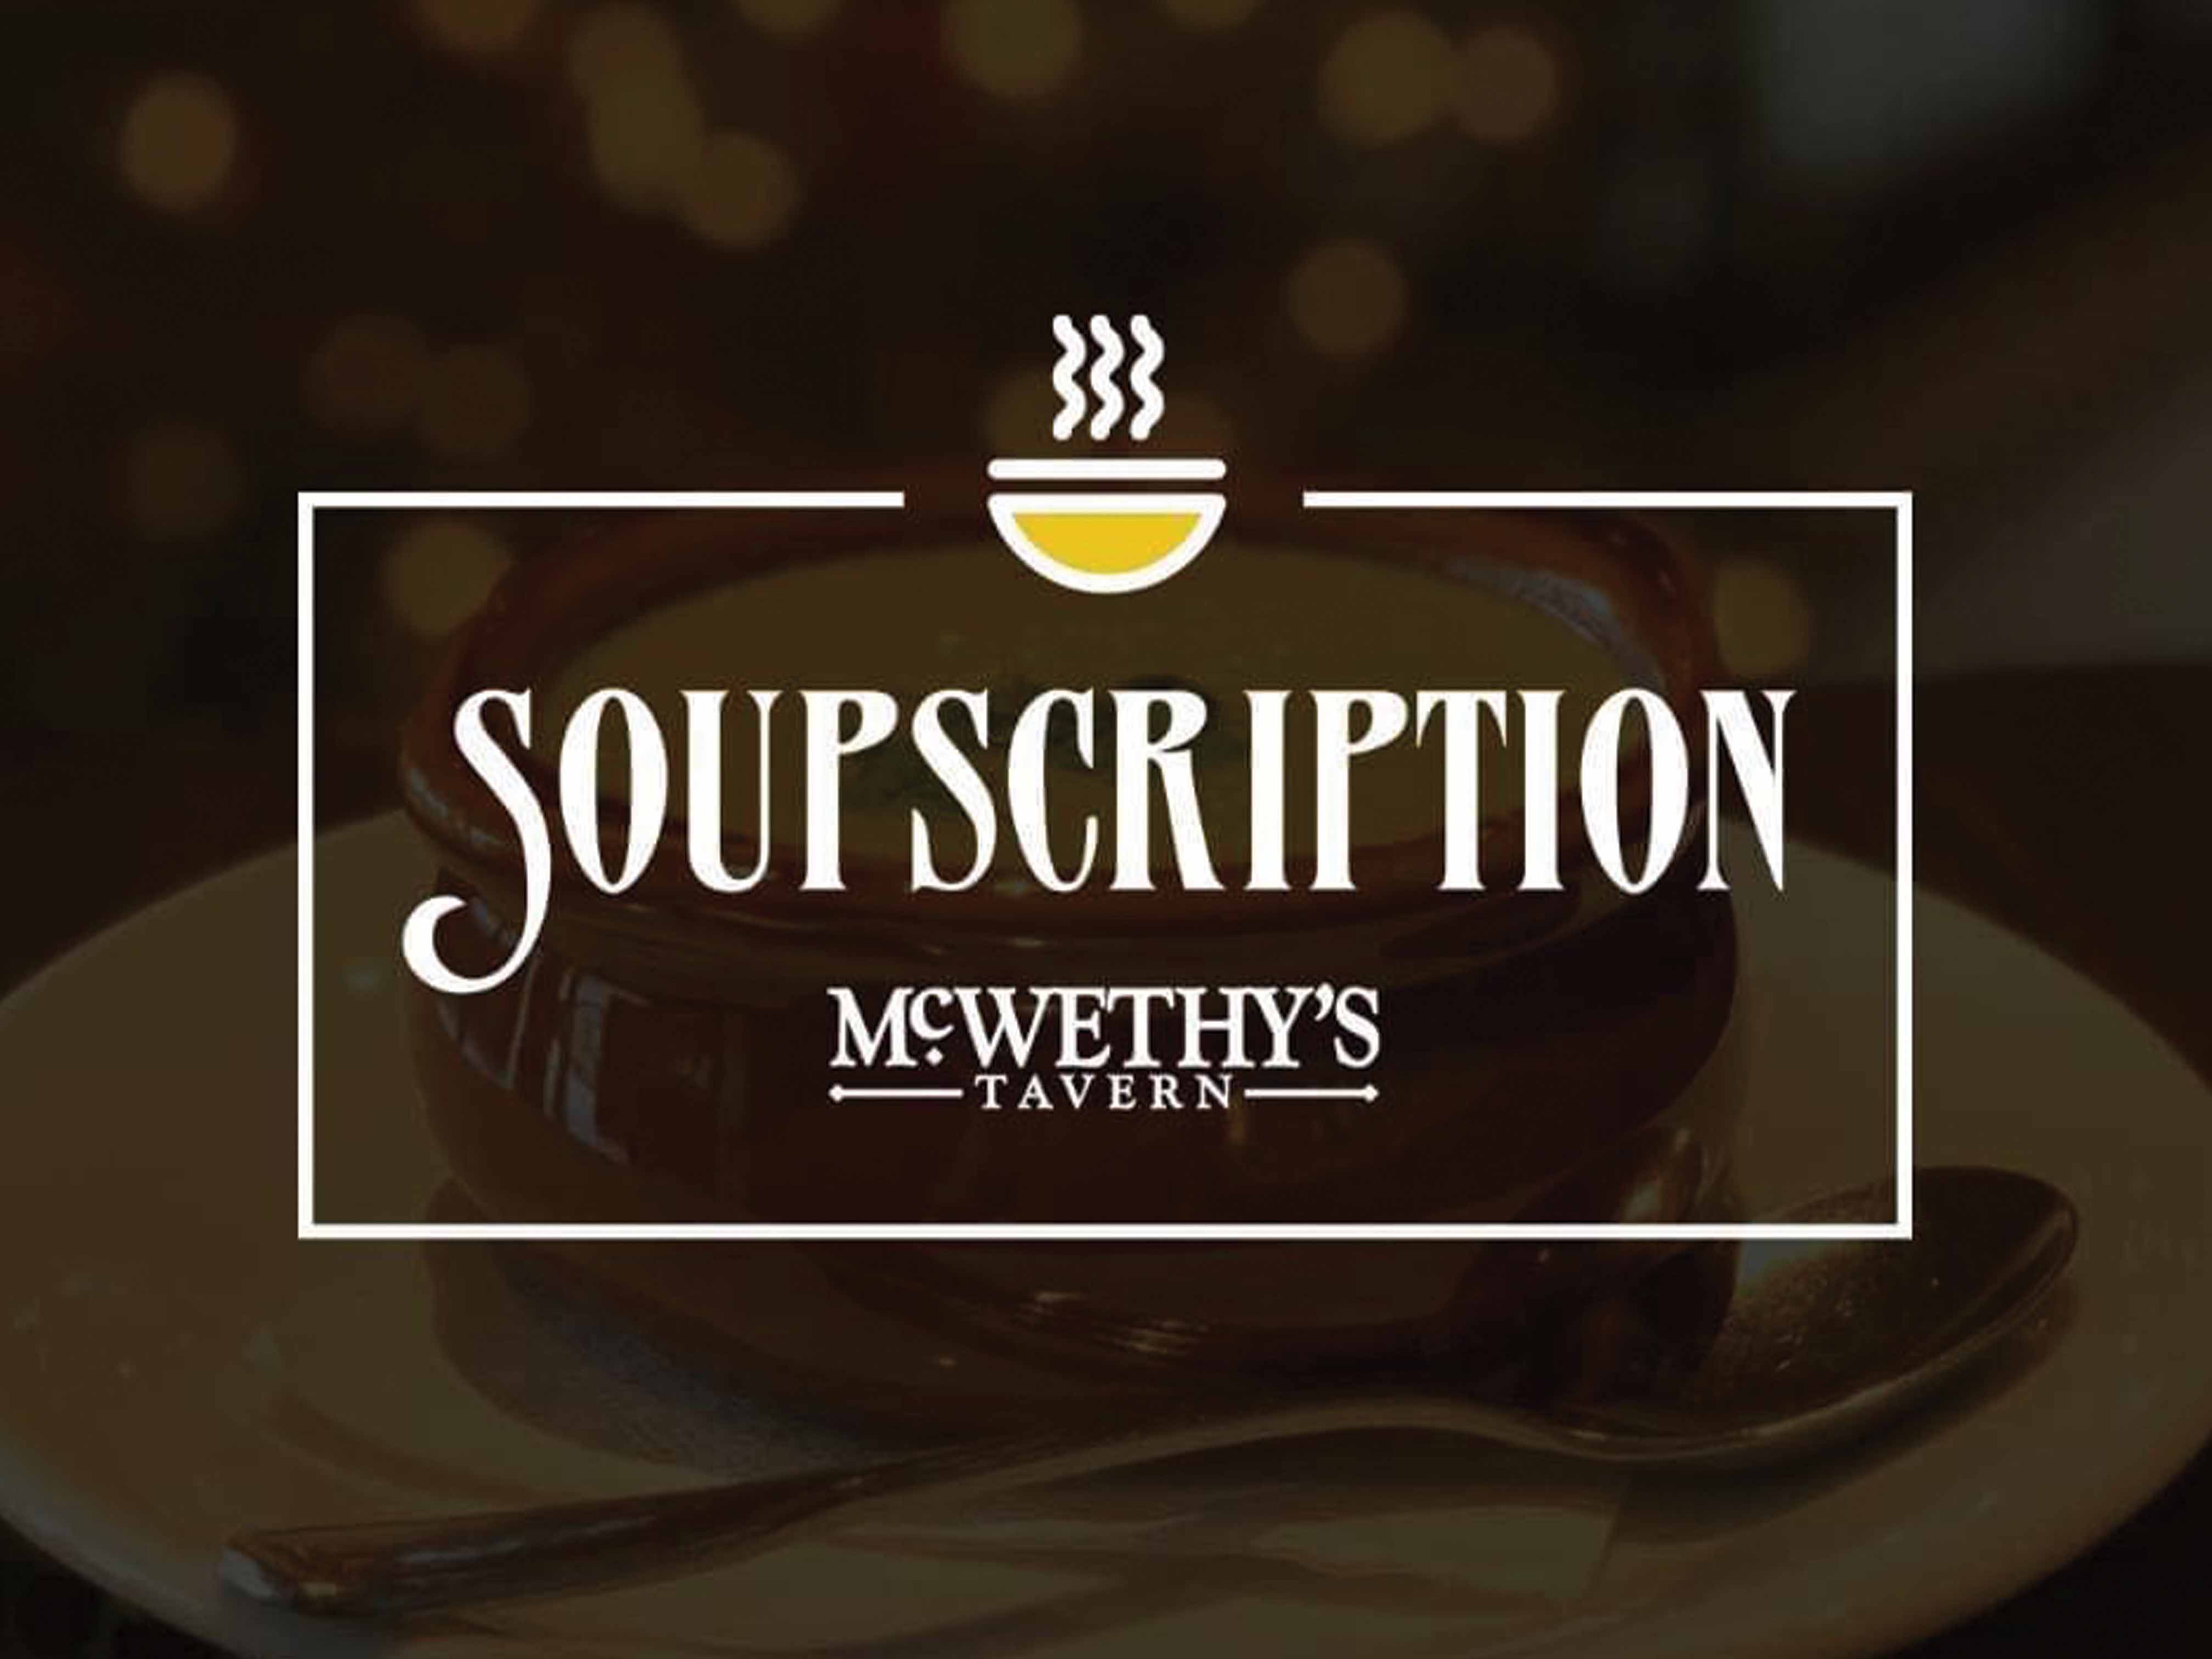 Sign Up For Our SOUPscription!